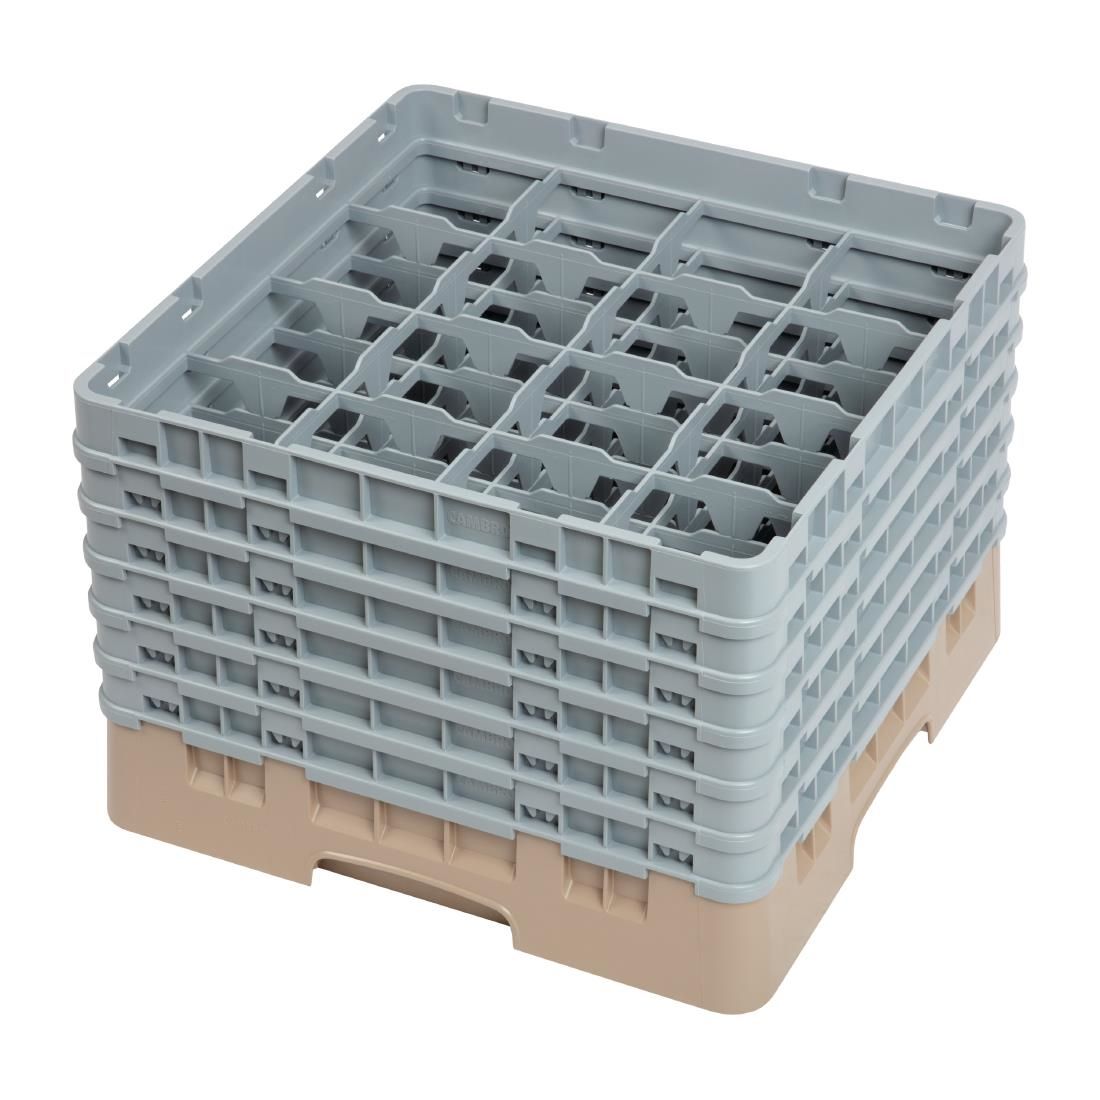 Cambro Camrack Beige 16 Compartments Max Glass Height 298mm JD Catering Equipment Solutions Ltd